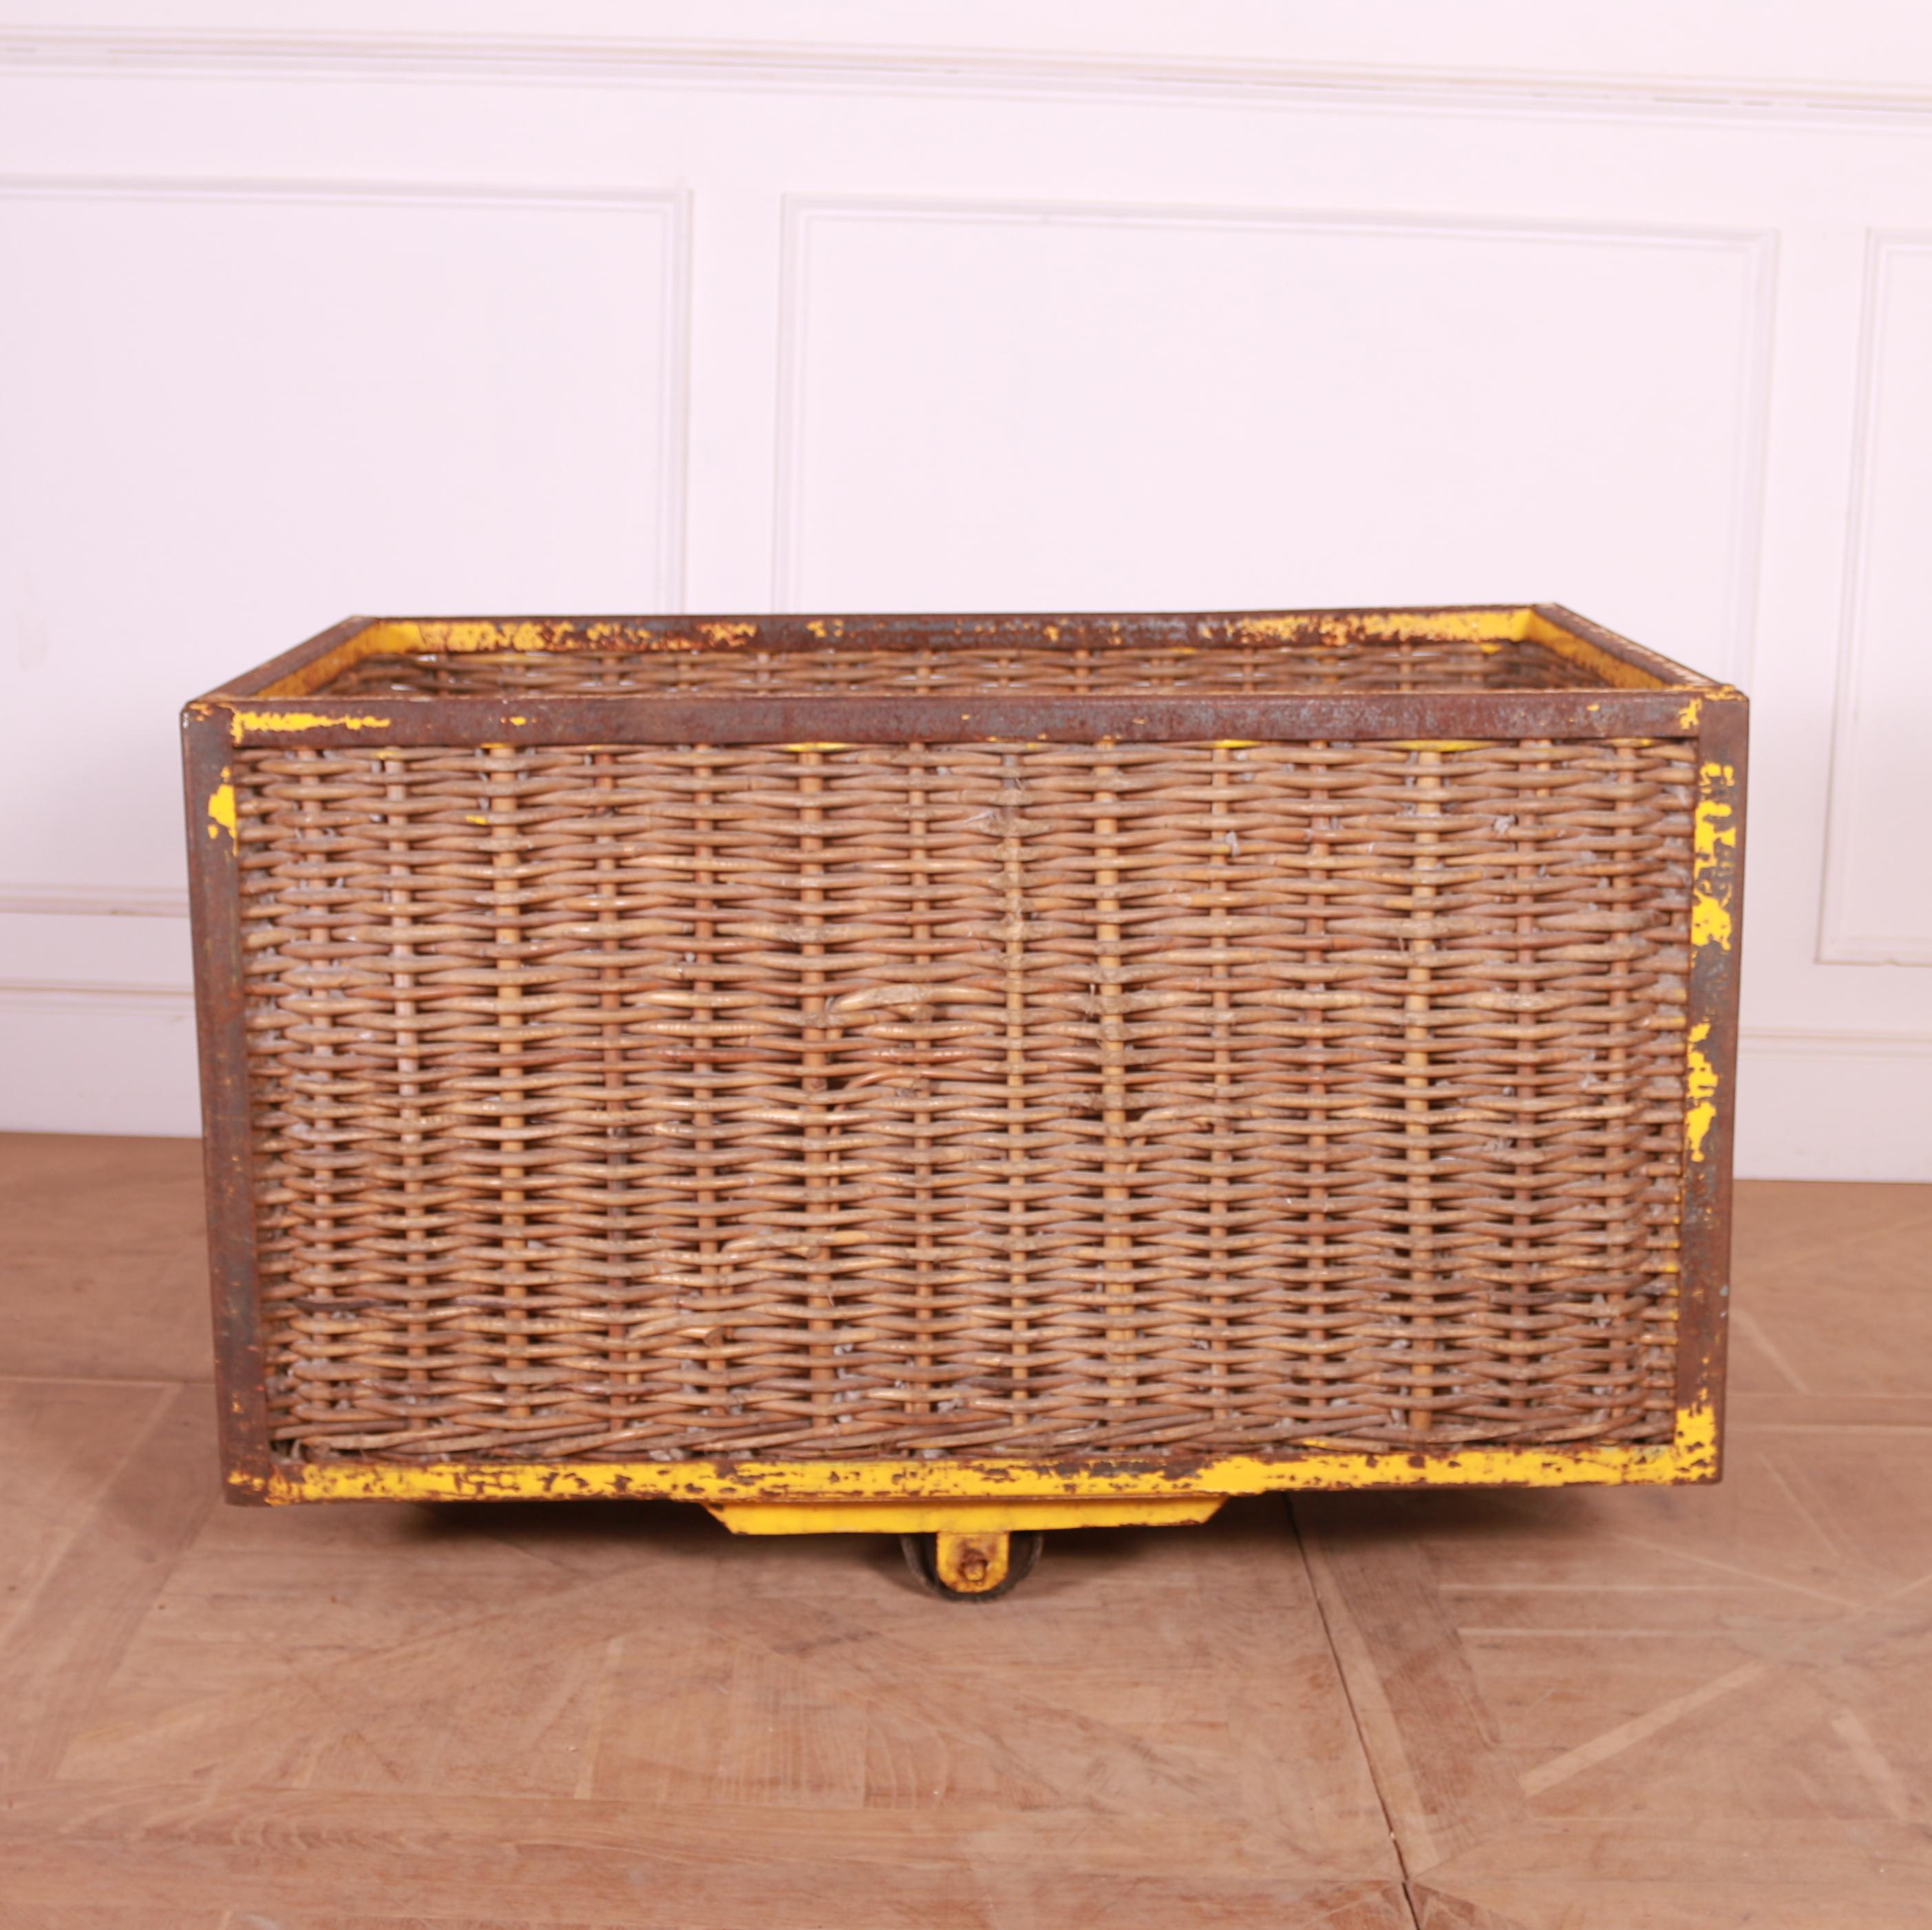 Early 20th century metal and wicker log basket on wheels. 1920.

Reference: 7745.

Dimensions
41 inches (104 cms) wide.
27 inches (69 cms) deep.
26 inches (66 cms) high.